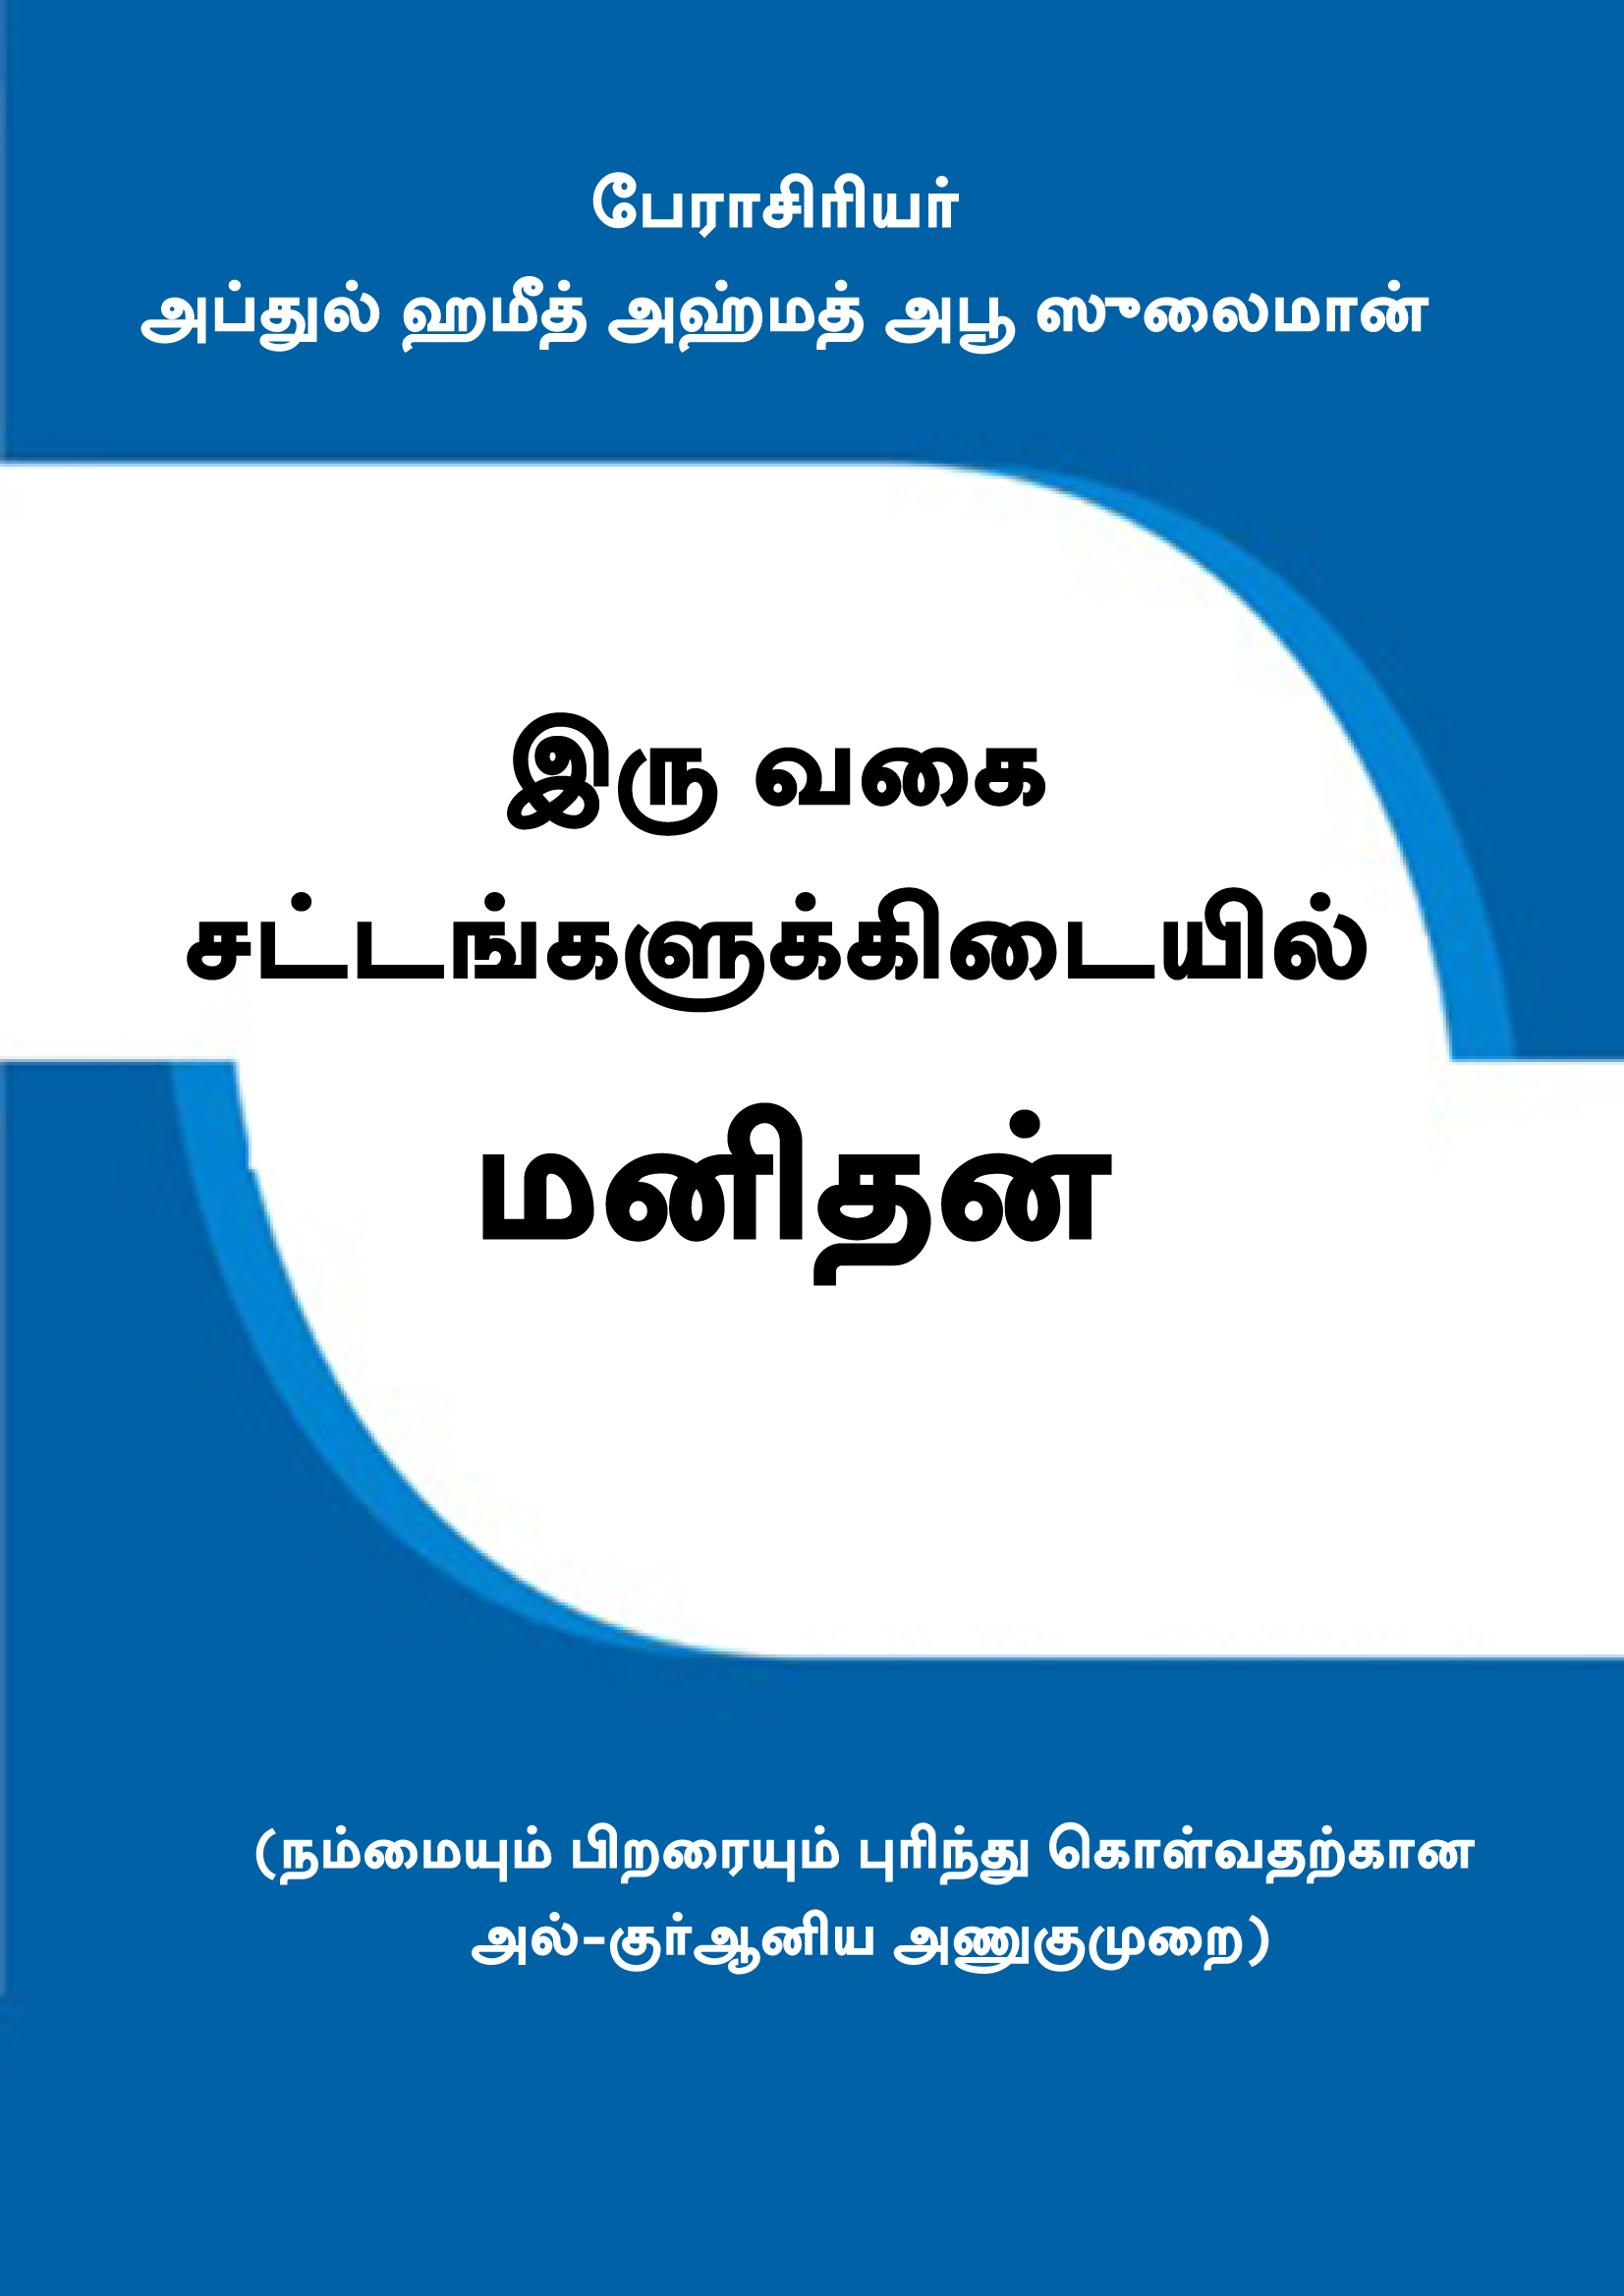 Tamil: Man Between the Two Laws' by AbdulHamid AbuSulayman